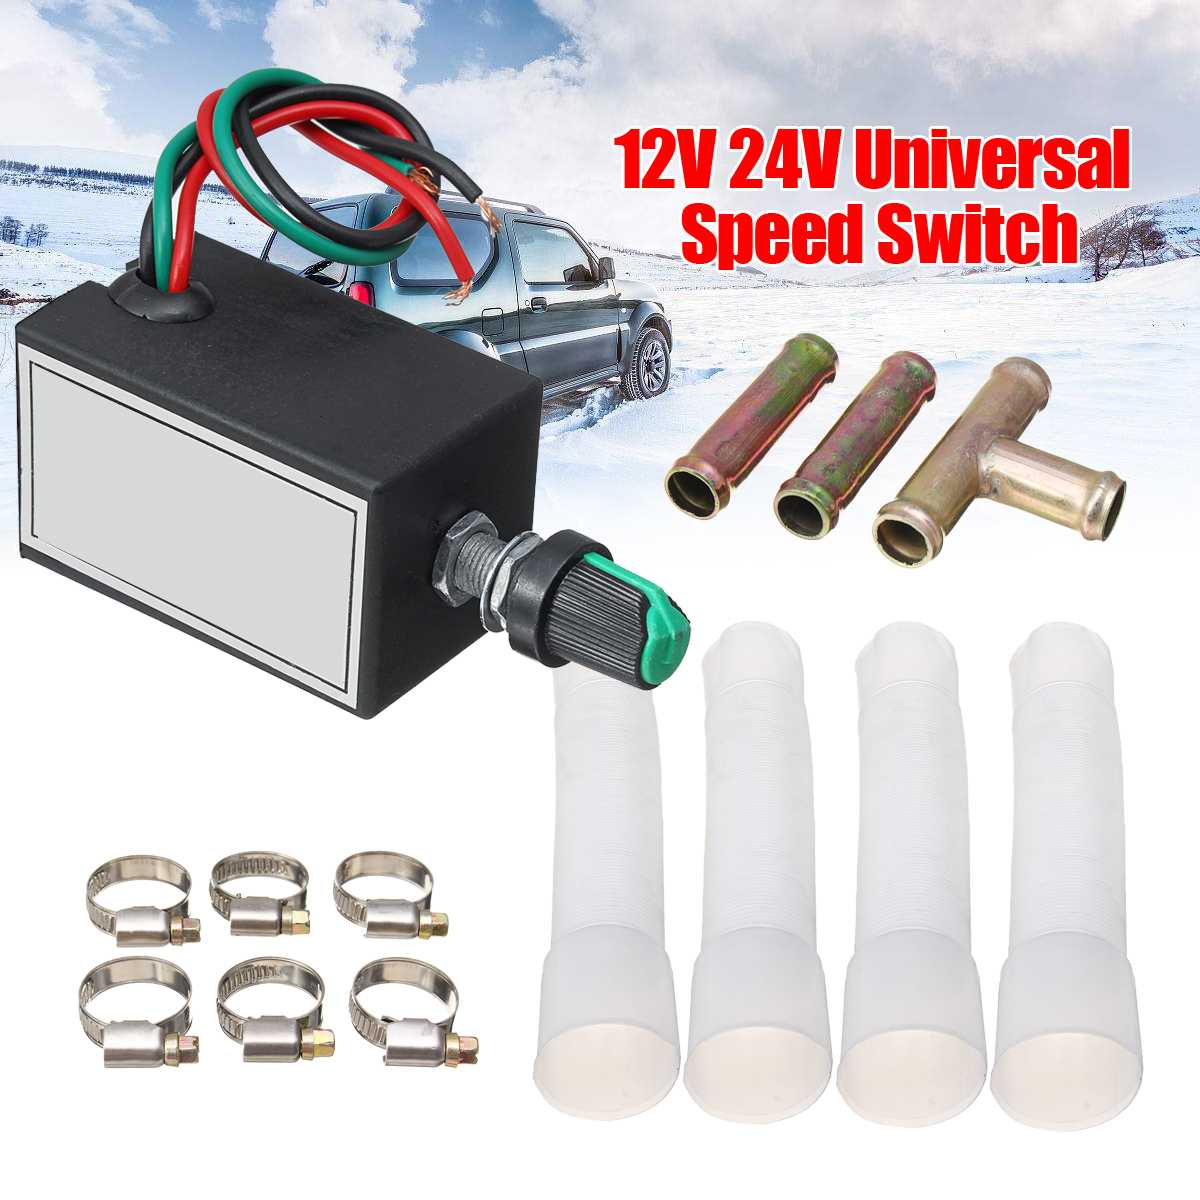 12V 24V Universal Car Heater Auto Winter Warmer Heating Fan 4 Port Iron Compact Car Electric Heater Defroster